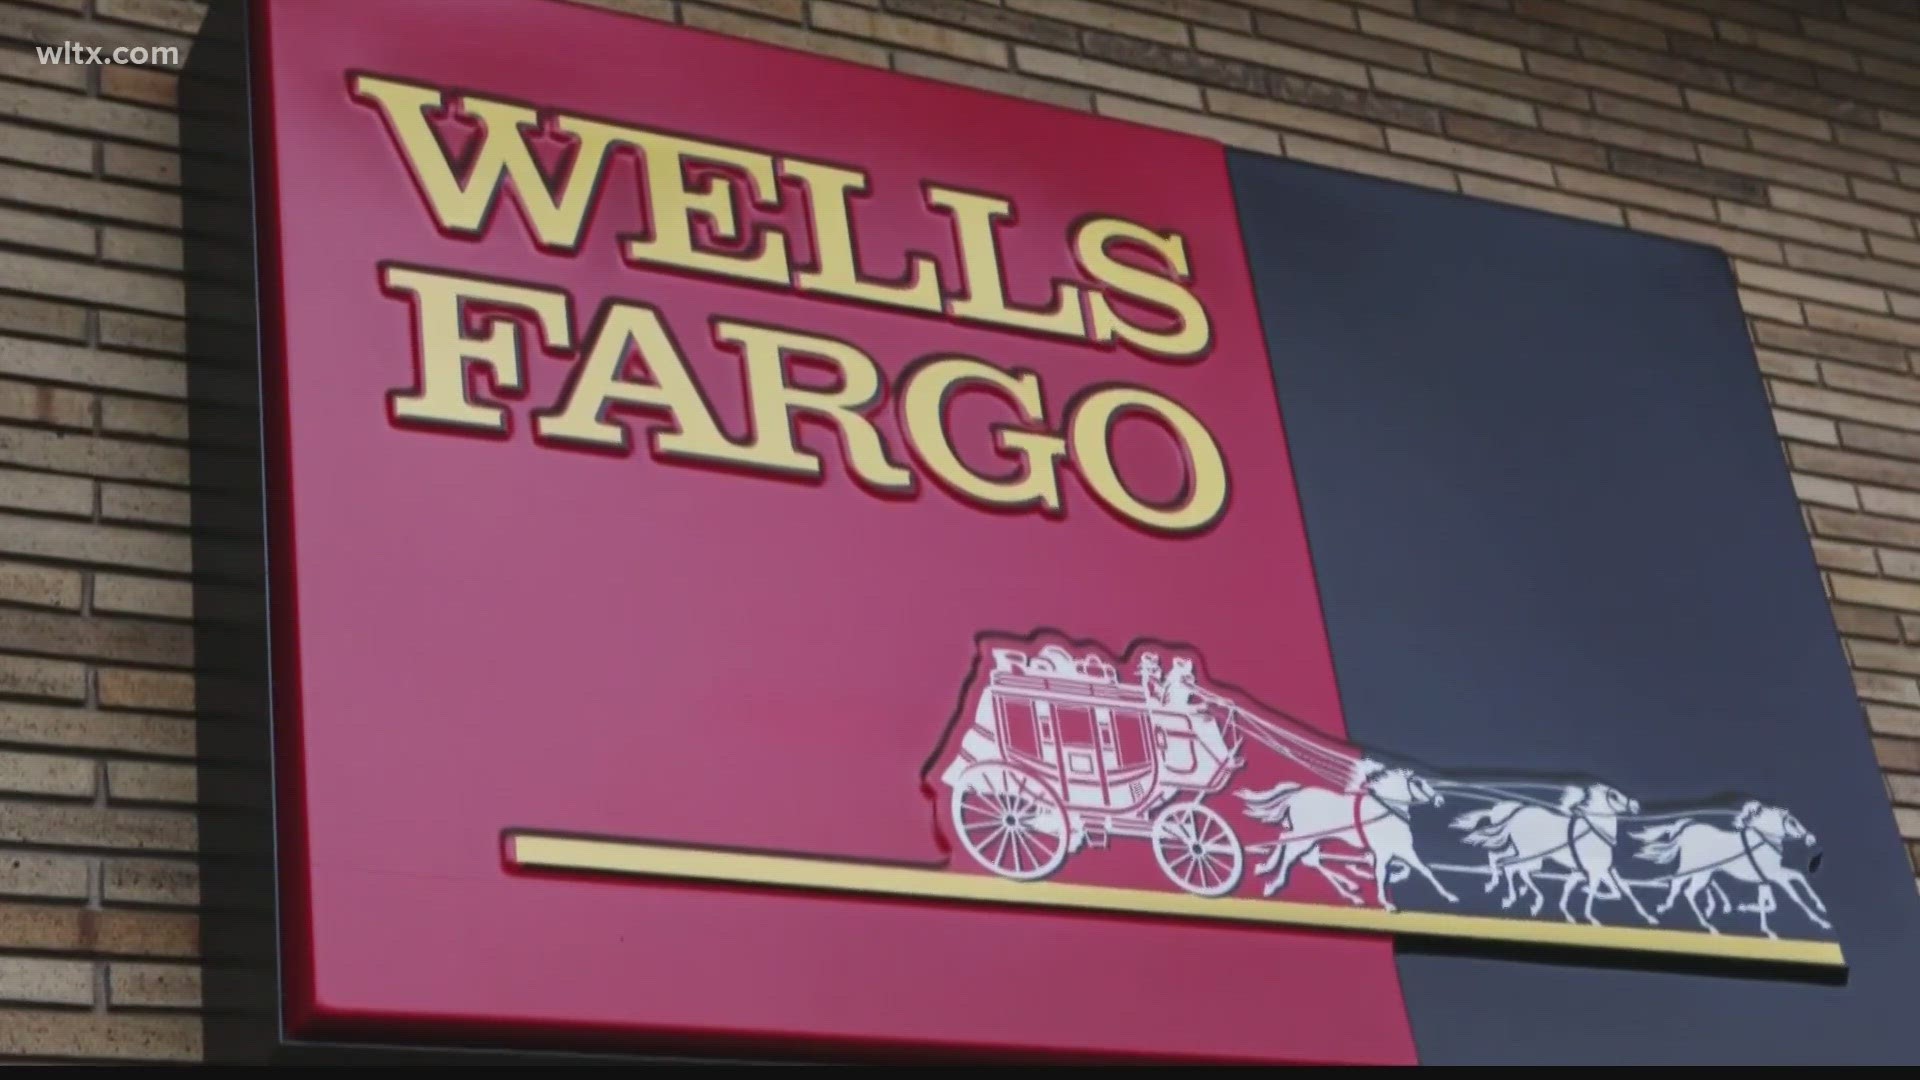 Many Wells Fargo customers are voicing frustration after money appeared to be missing from their online banking accounts on Friday morning.